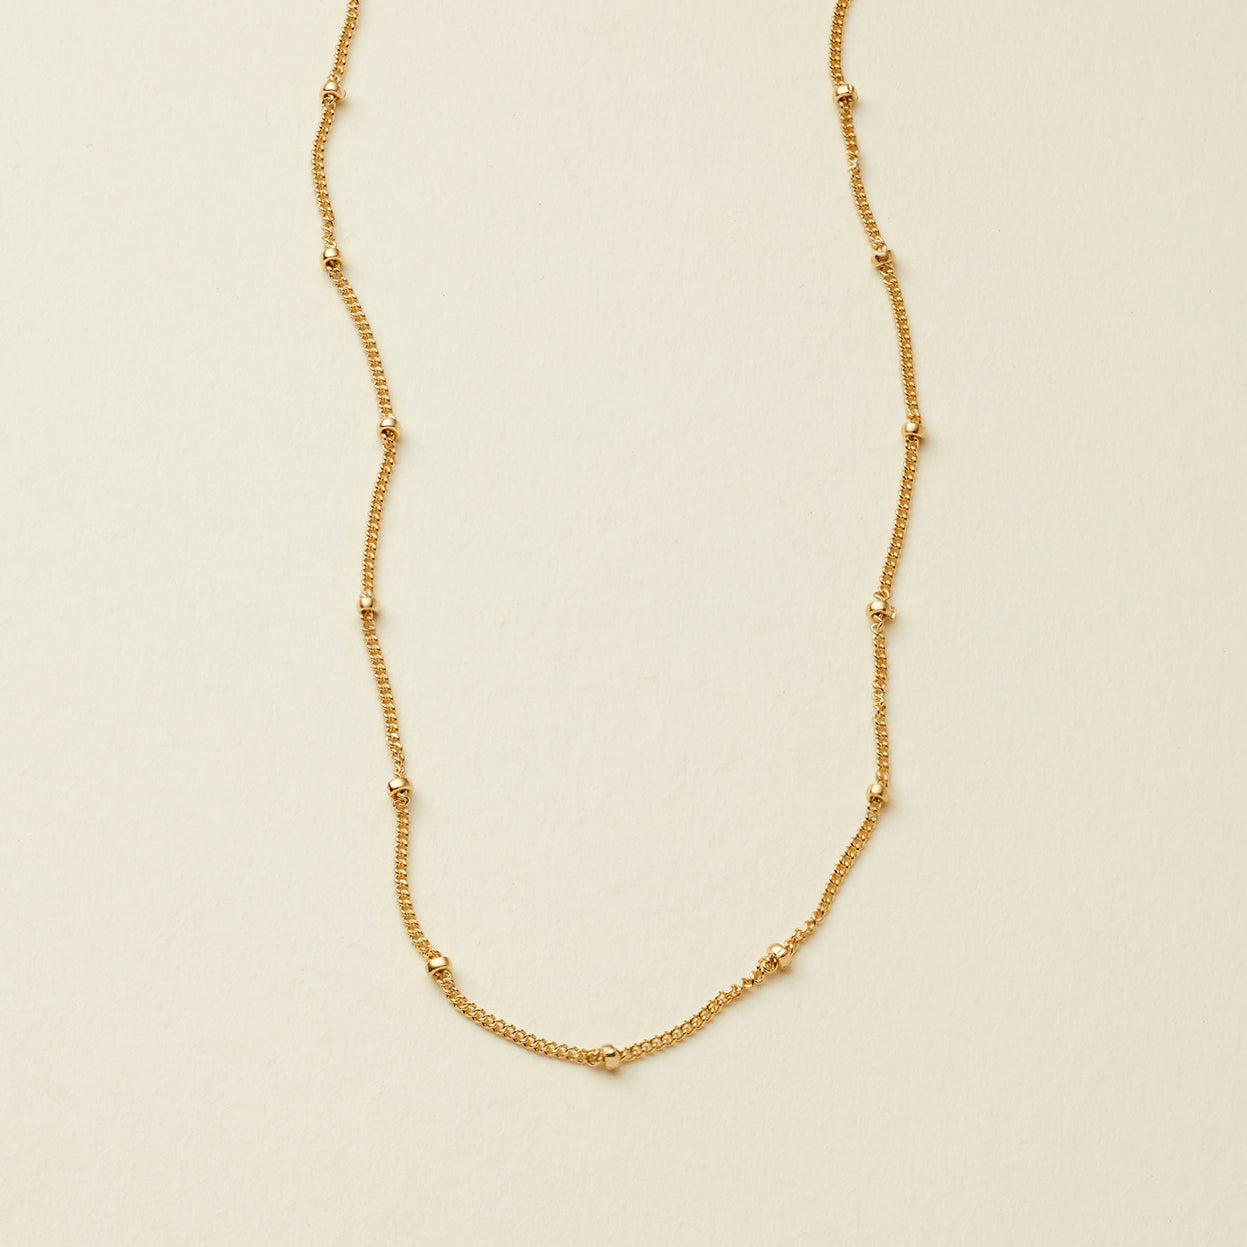 Satellite Chain | Final Sale Gold Filled / 20" Necklace